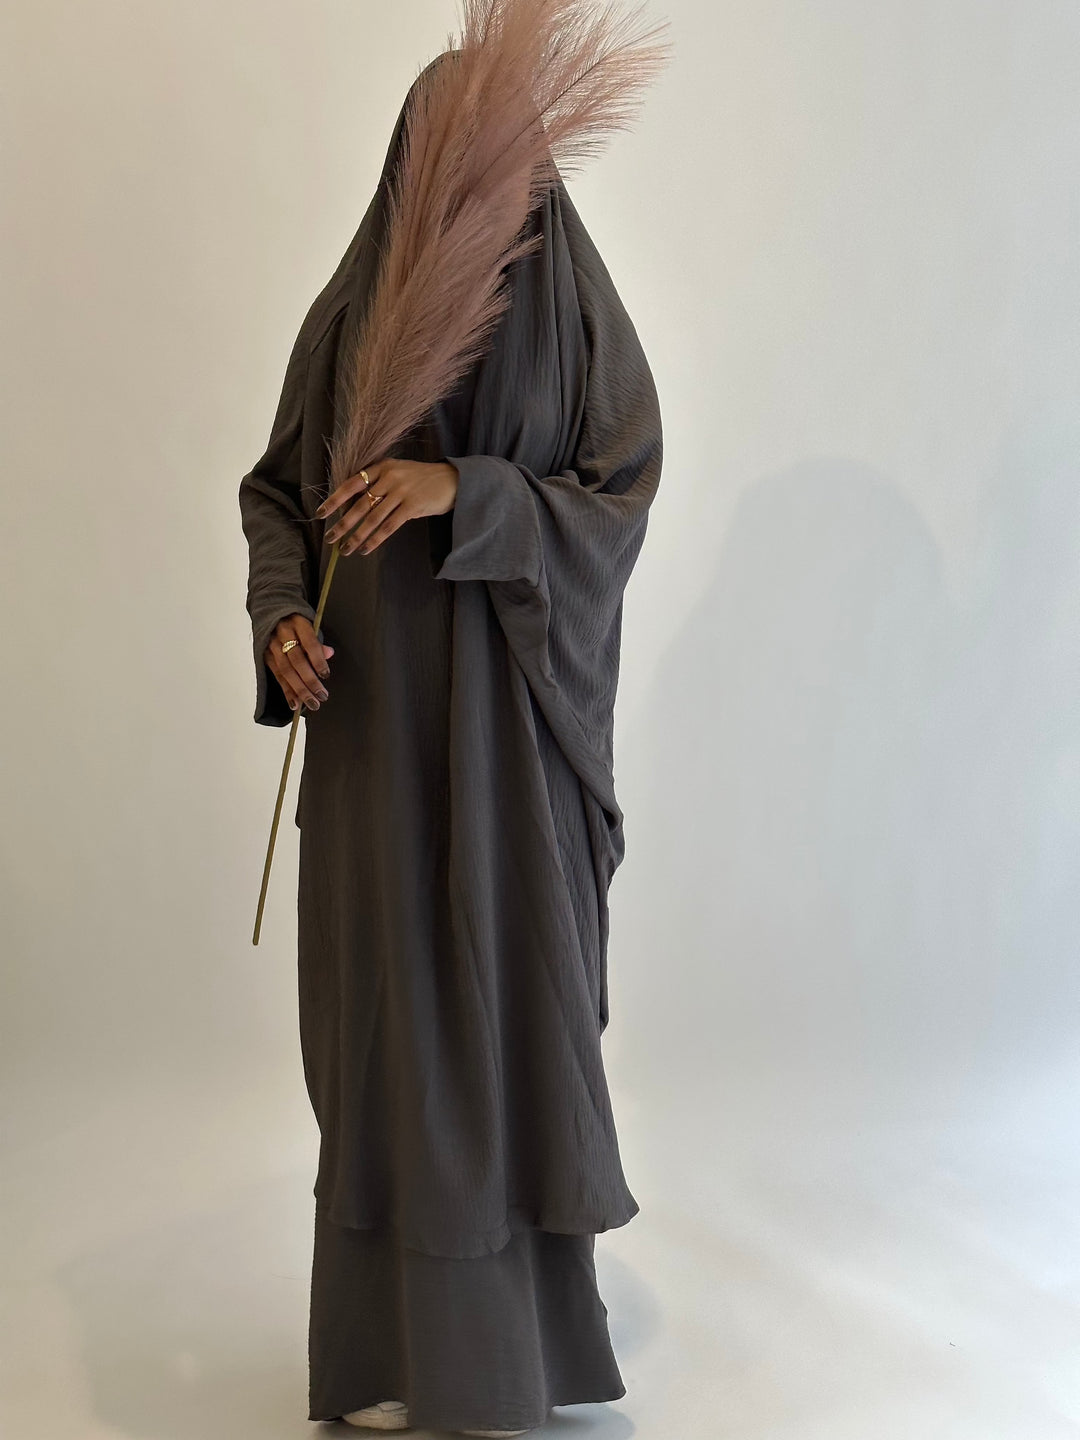 Get trendy with Mariya 2-piece Jilbab - Gray -  available at Voilee NY. Grab yours for $19.99 today!